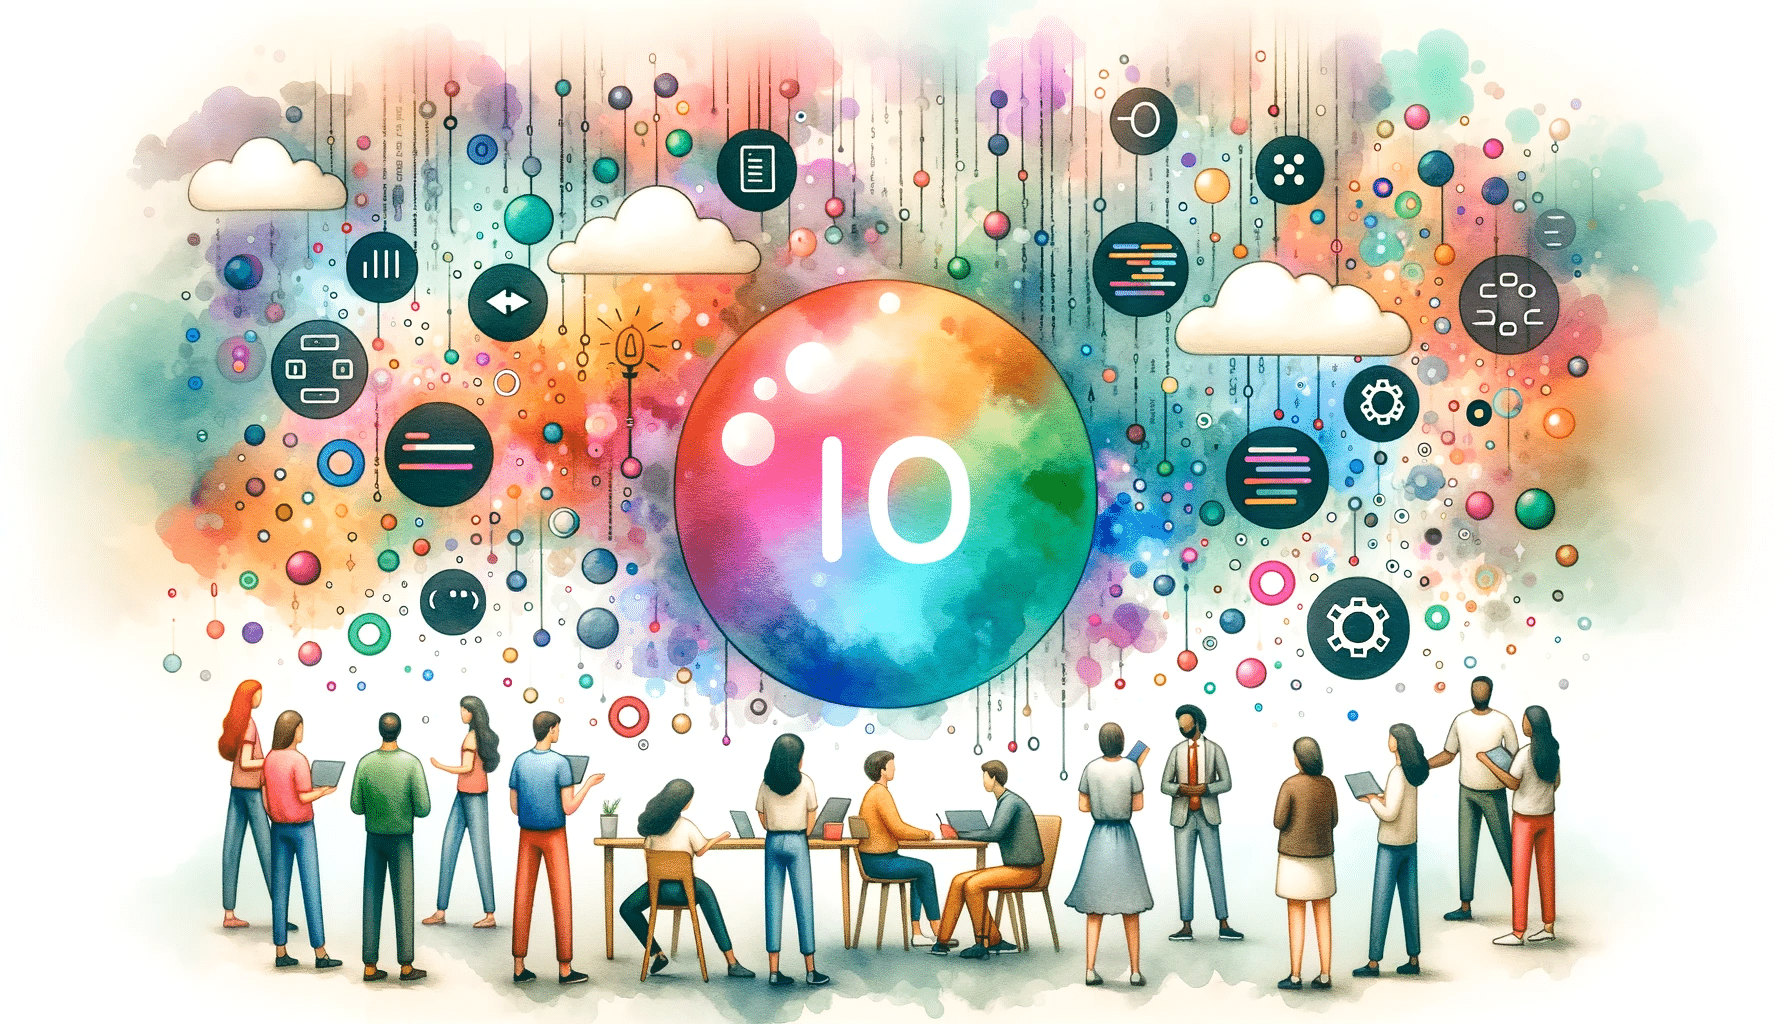 Illustration of people interacting and collaborating in front of a colorful abstract background with tech icons and a central motif labeled "io." Contemporary, watercolor textured, creative concept.